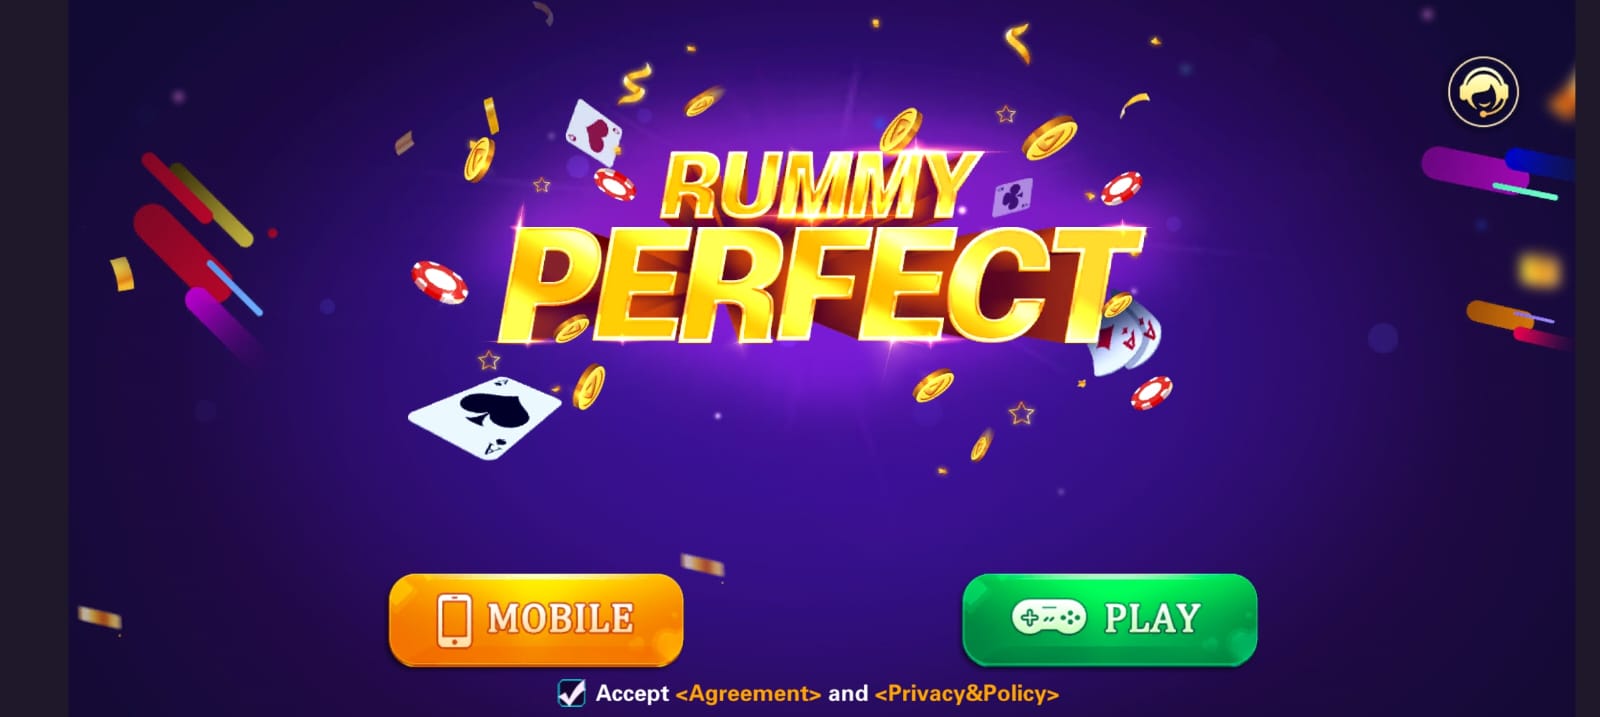 Create Account In Rummy Perfect App